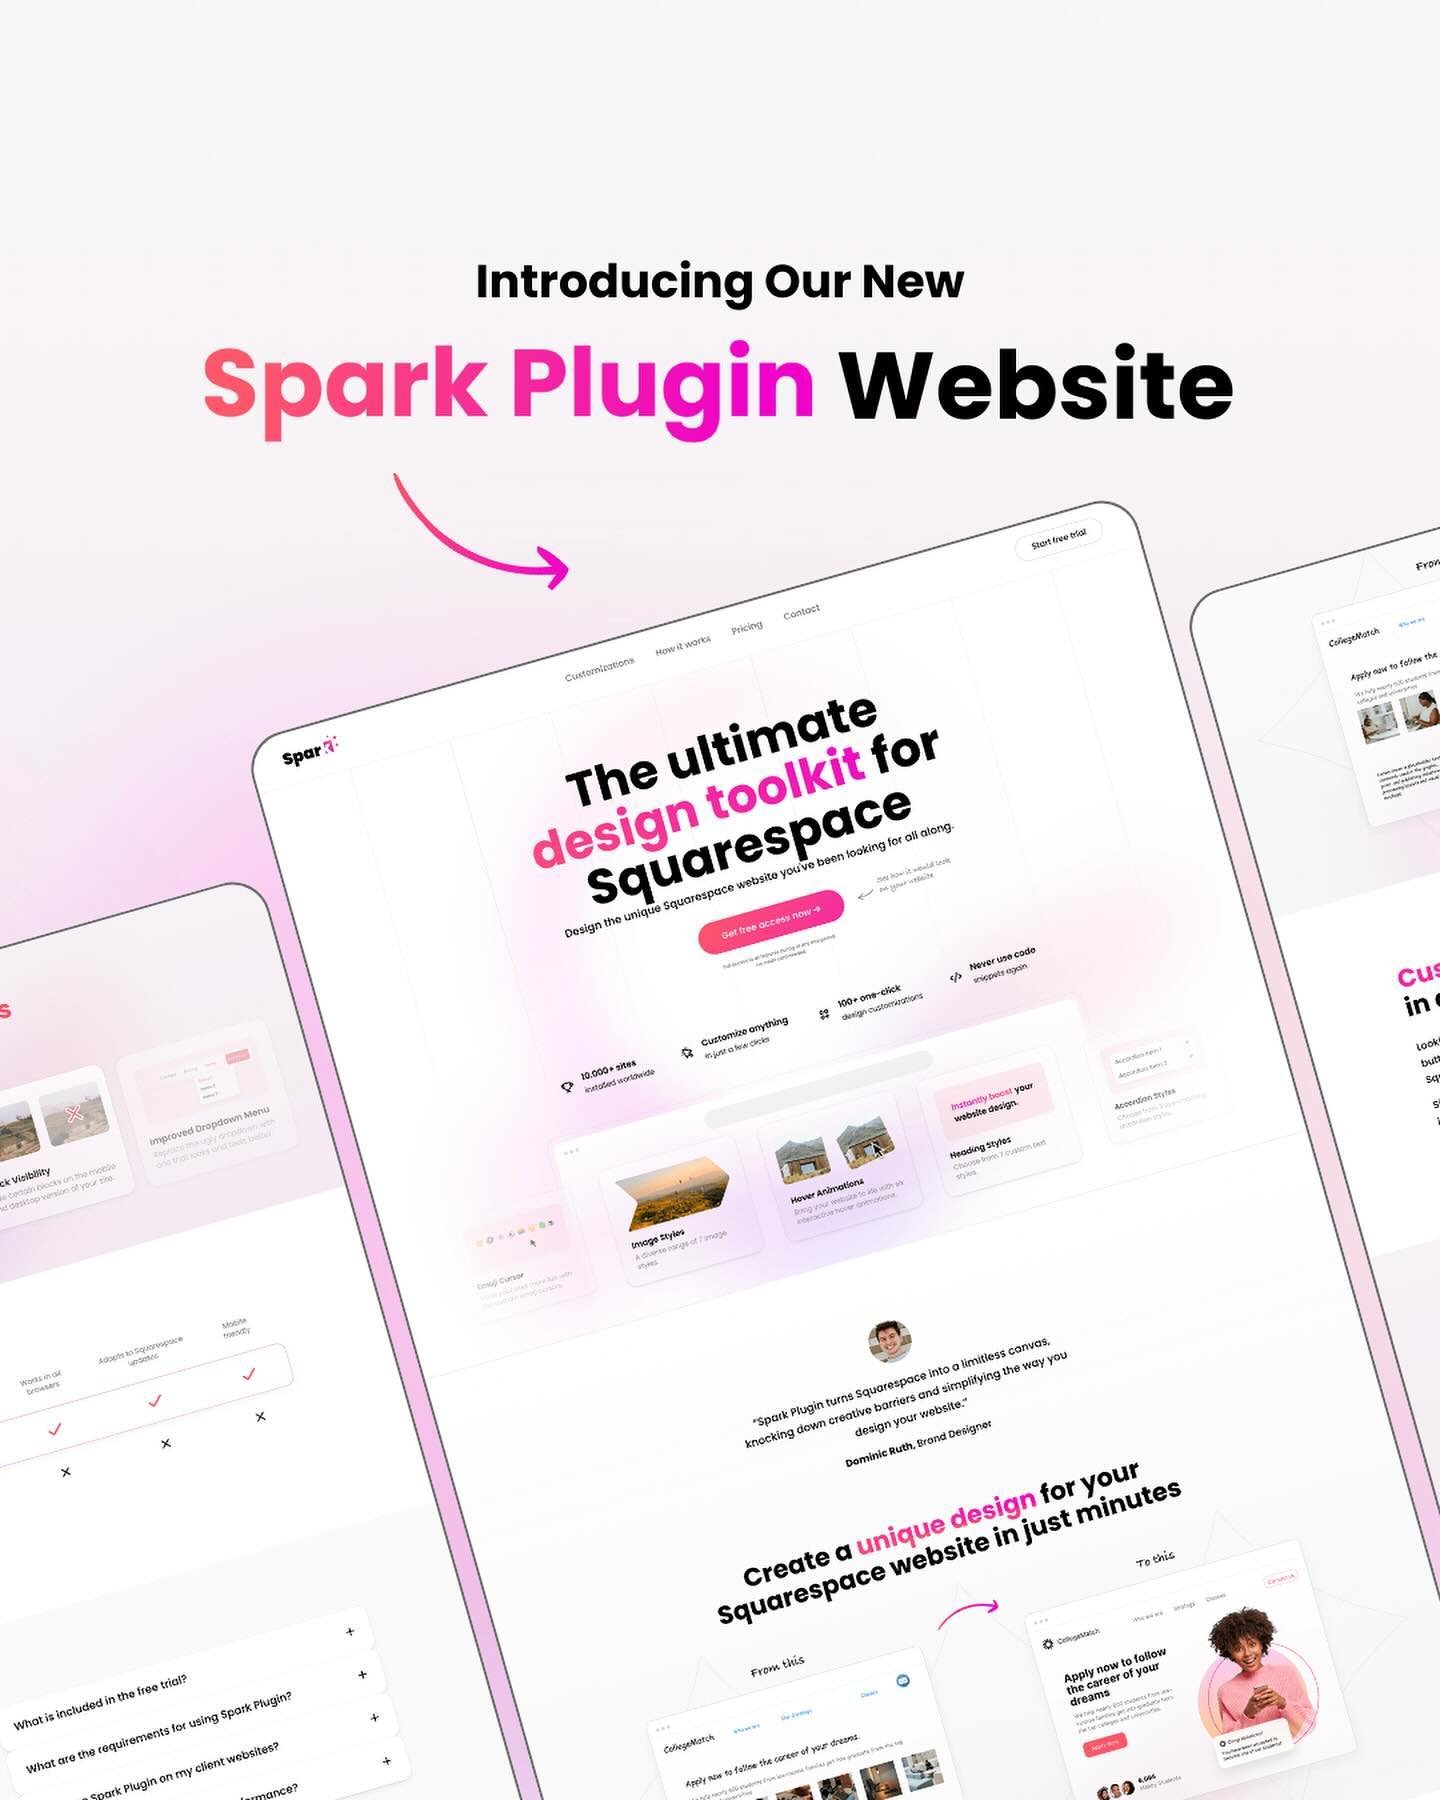 Introducing our new and updated Squarespace website ✨💻

As a Squarespace plugin, we believed it was crucial for our site to reflect the essence of Spark Plugin. That&rsquo;s why we incorporated elements like gradient backgrounds, minimal lines, and 